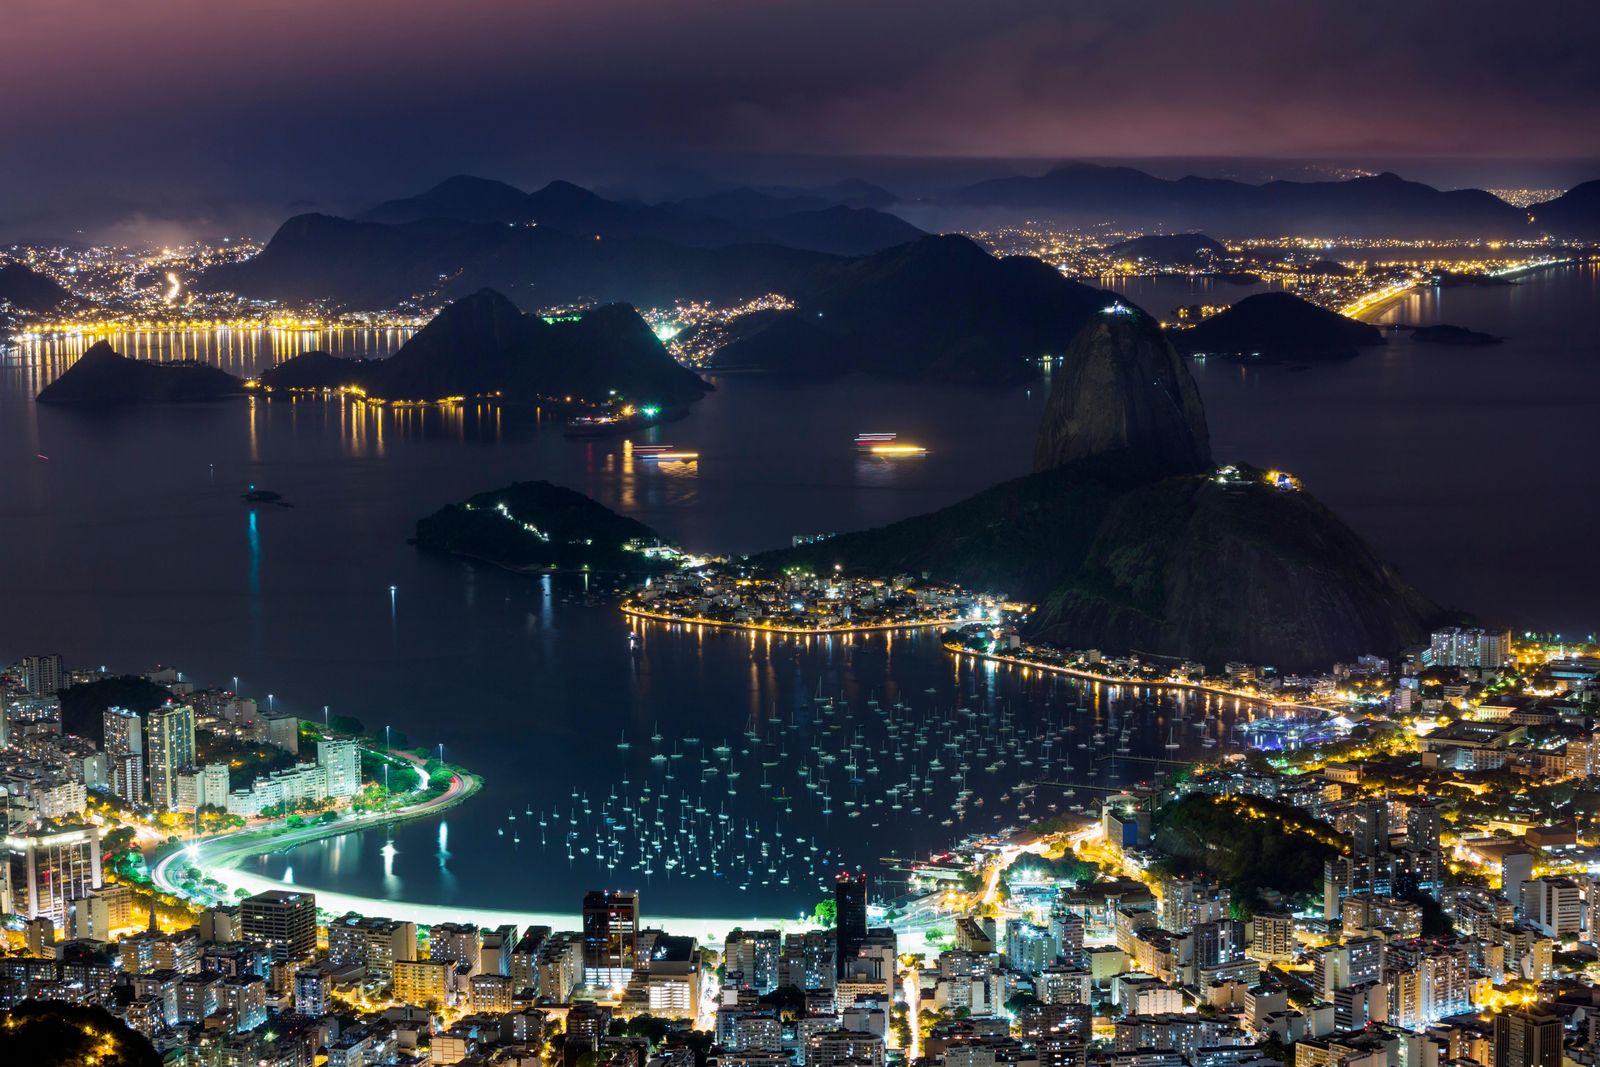 Did you know Rio de Janeiro was once Portugal's capital?